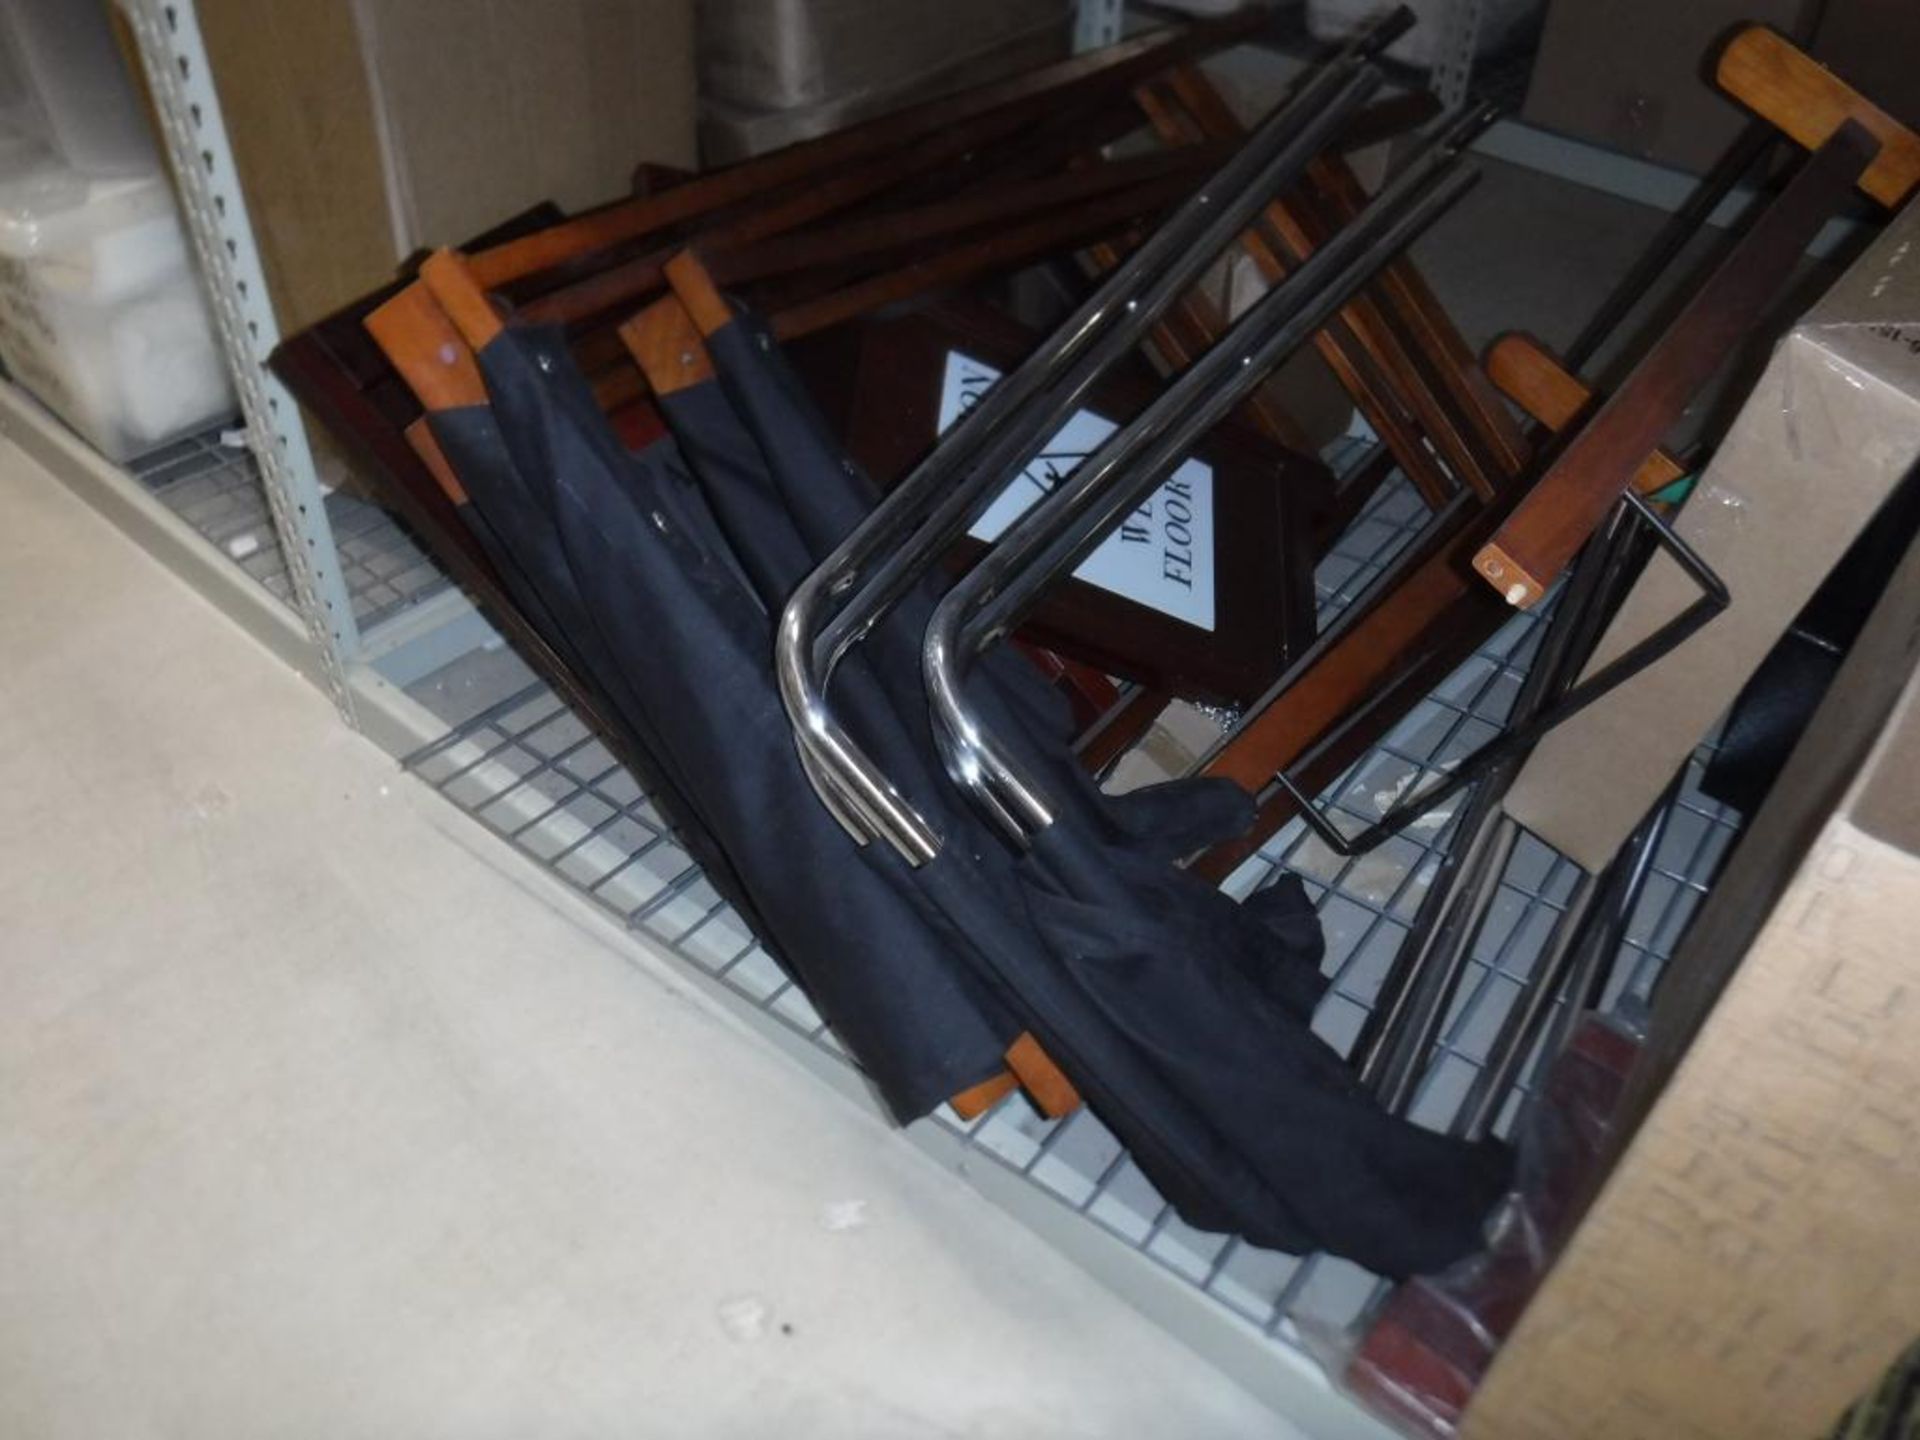 Lot c/o: Merchandising Storage Room-(NO PERSONAL INCLUDEDNO SHELVING) All Contents, Rolling Ladder, - Image 27 of 40